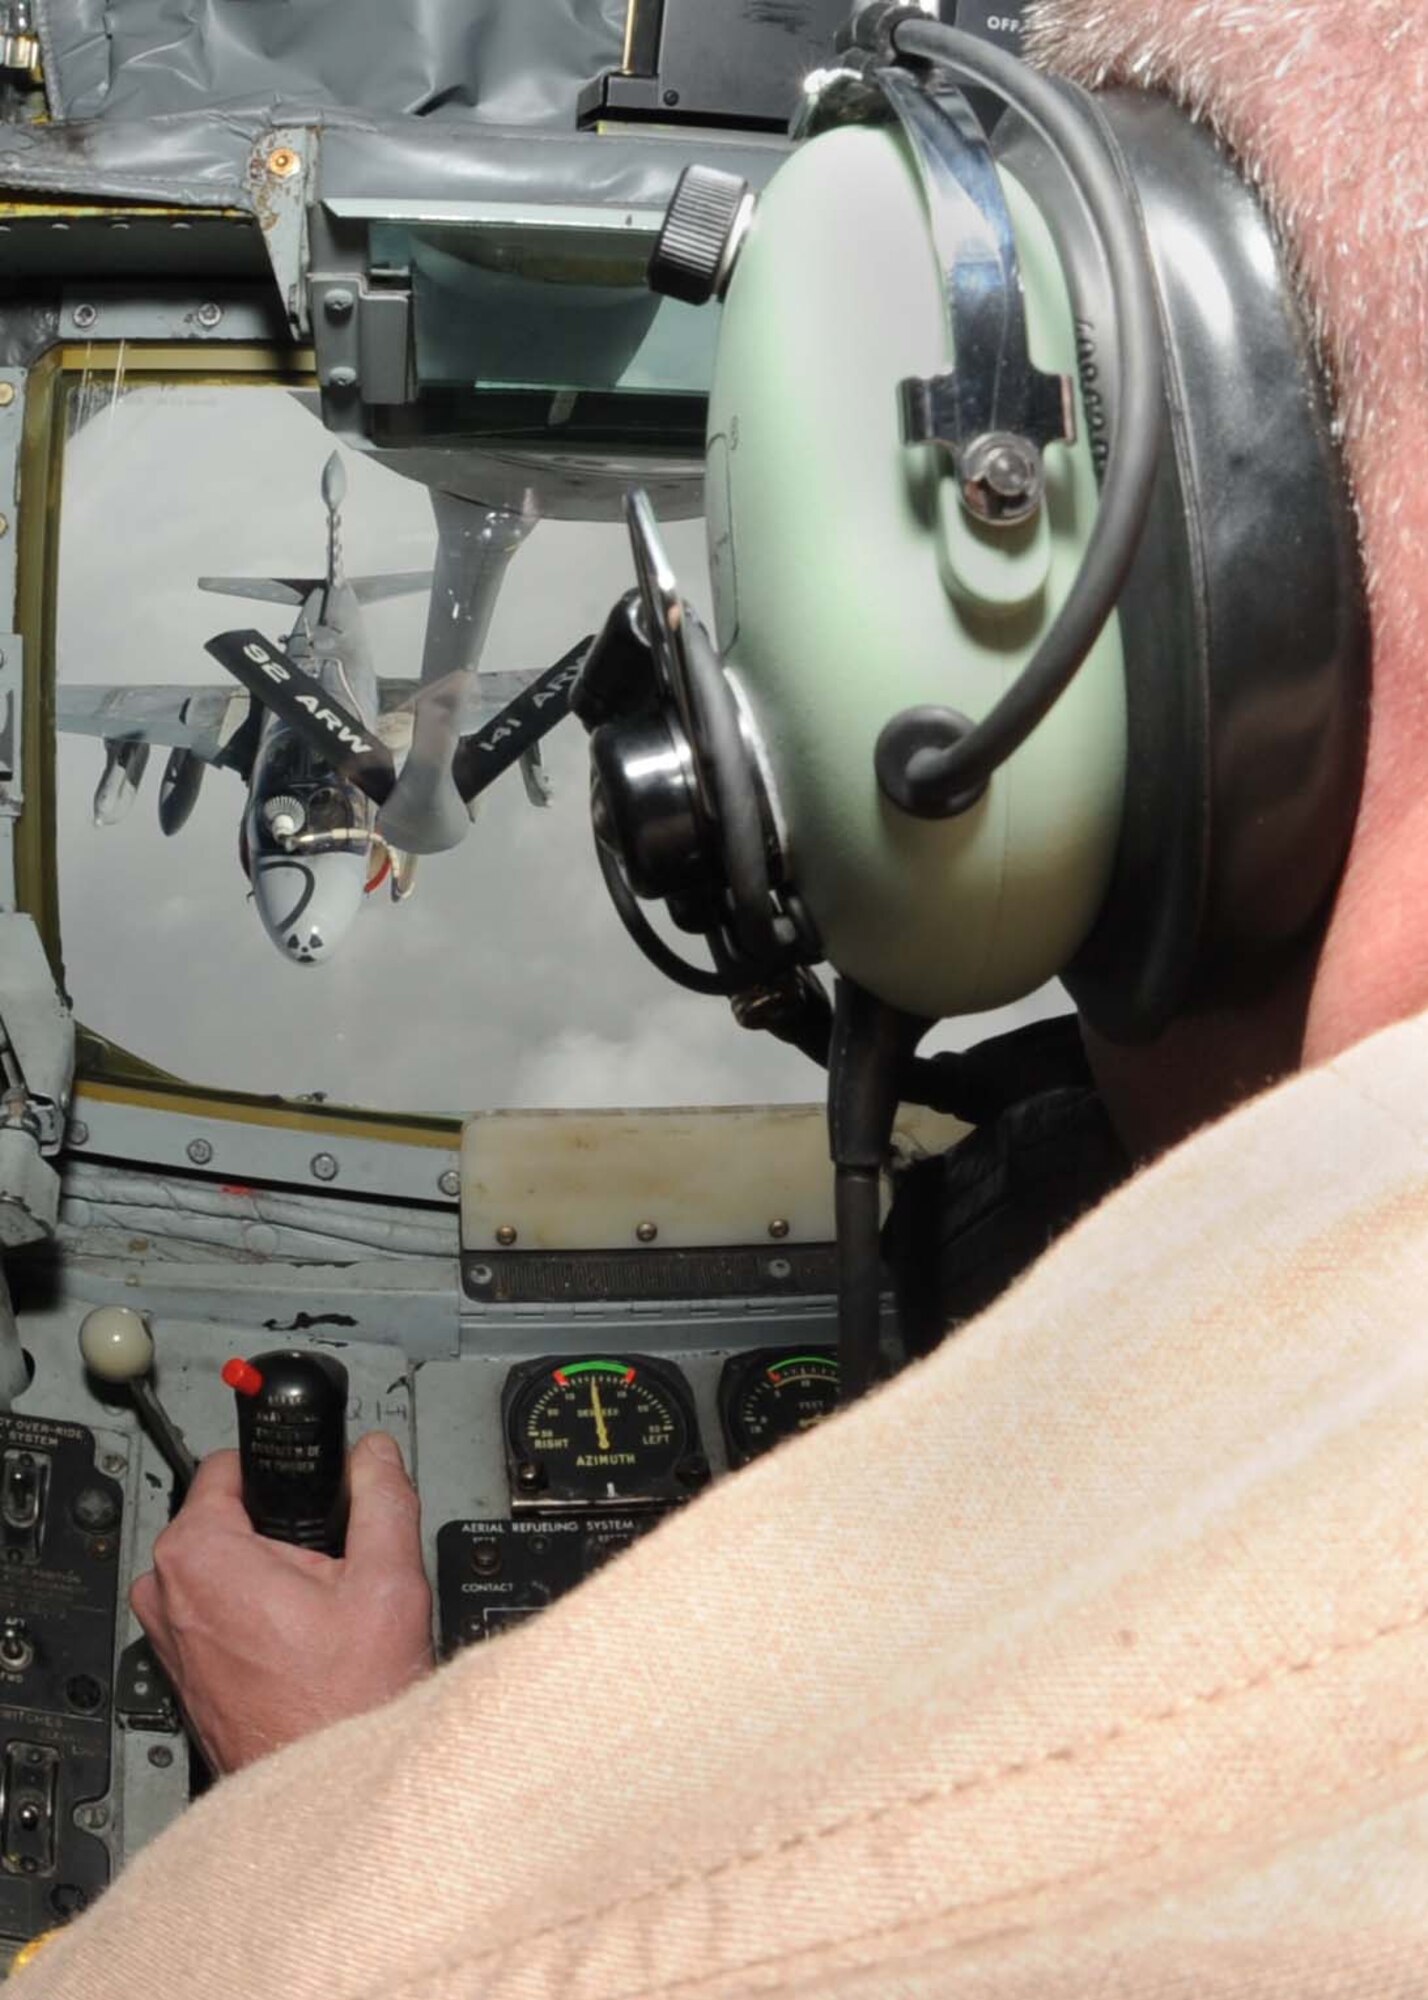 Senior Master Sgt. Todd Daniels, 22nd Expeditionary Air Refueling Squadron aerial refueler, off-loads fuel to a U.S. Navy EA-6B Prowler from the back of a KC-135 Stratotanker over Afghanistan April 10, 2010. The day of April 10 made 22nd EARS history when an air crew logged the 16,000th sortie. (U.S. Air Force photo/Senior Airman Nichelle Anderson/released)